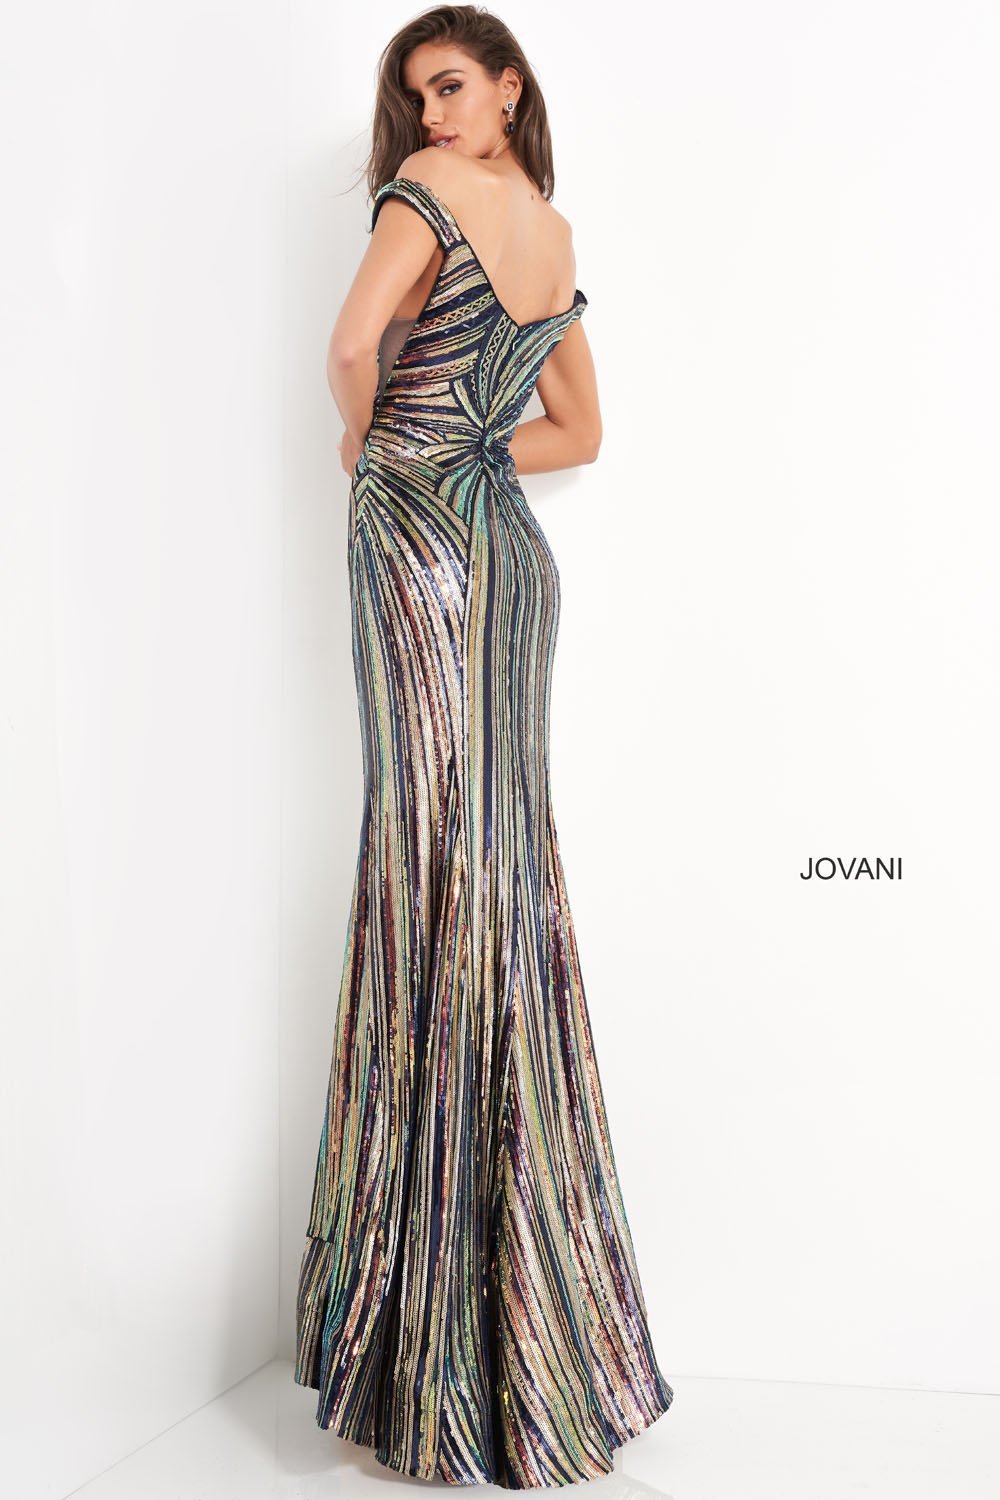 Jovani 04809 dress images in these colors: Black Multi.